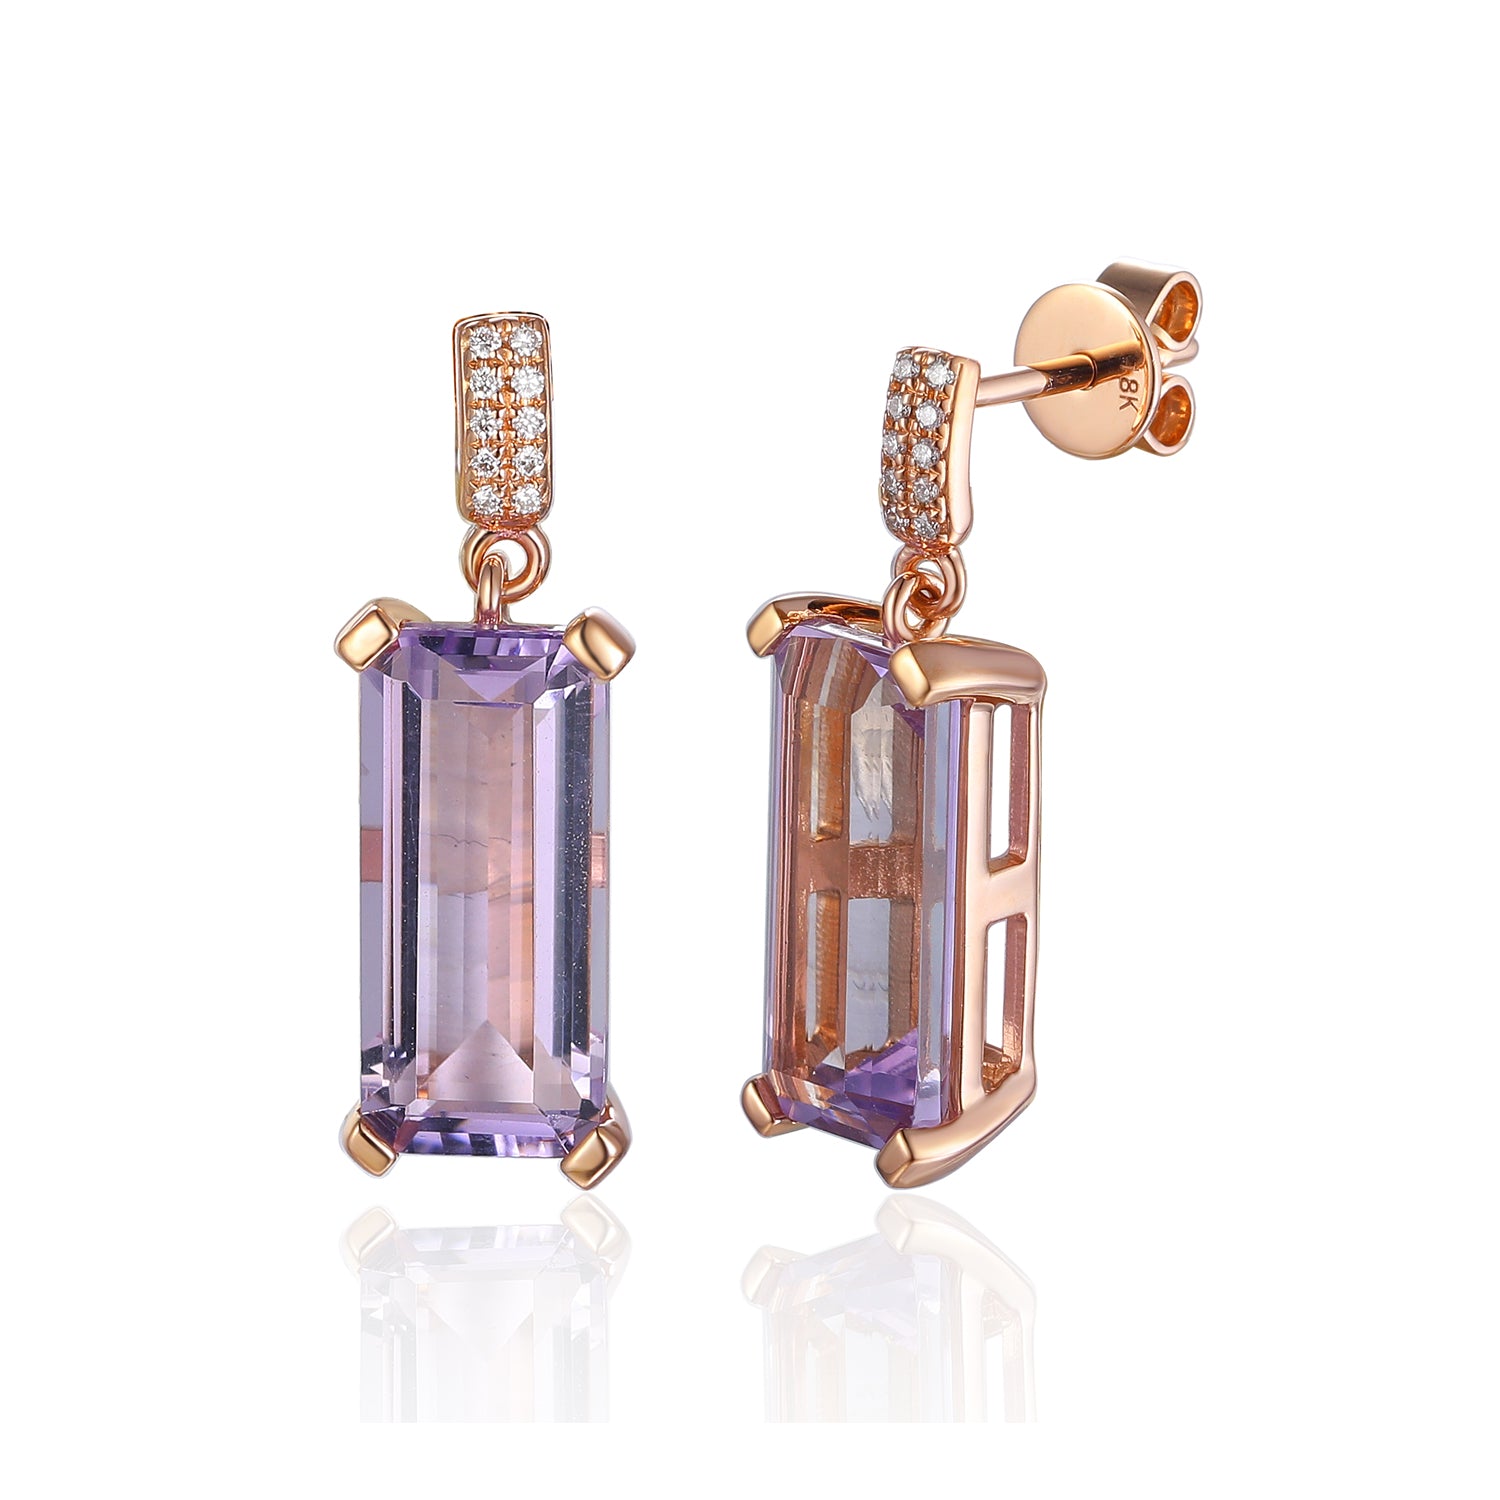 Long octagon Gemstone Earrings with Pave Diamond Drop